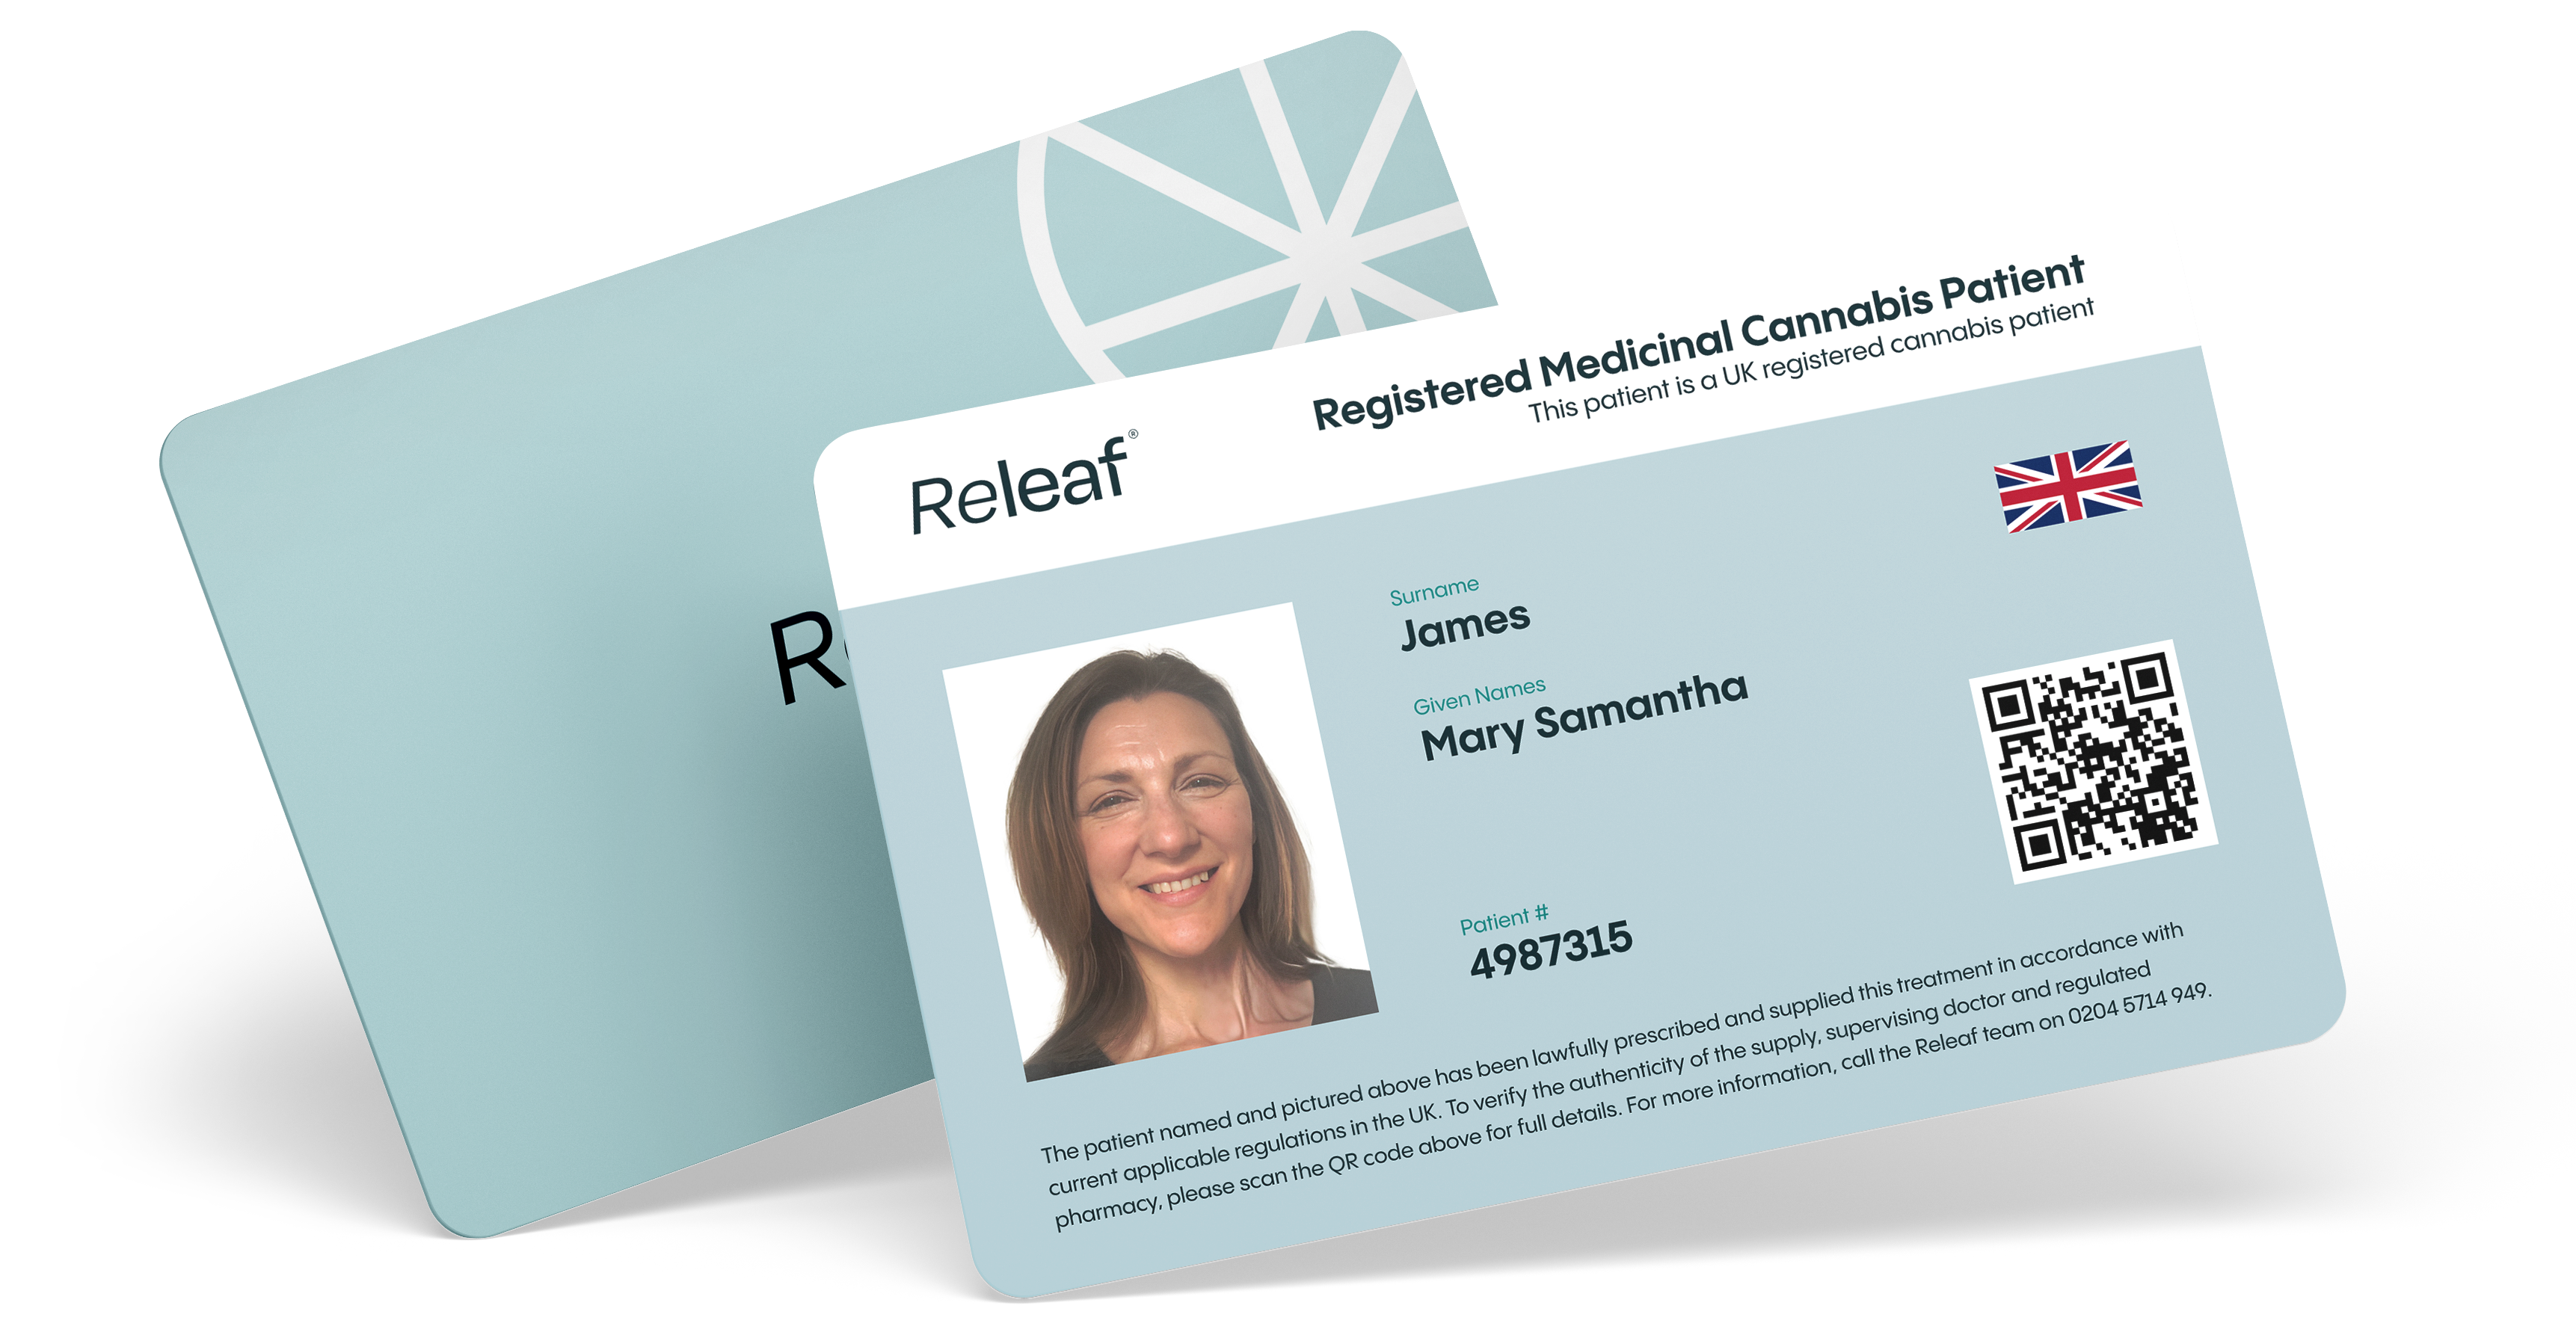 Cannabis card for back pain in the UK